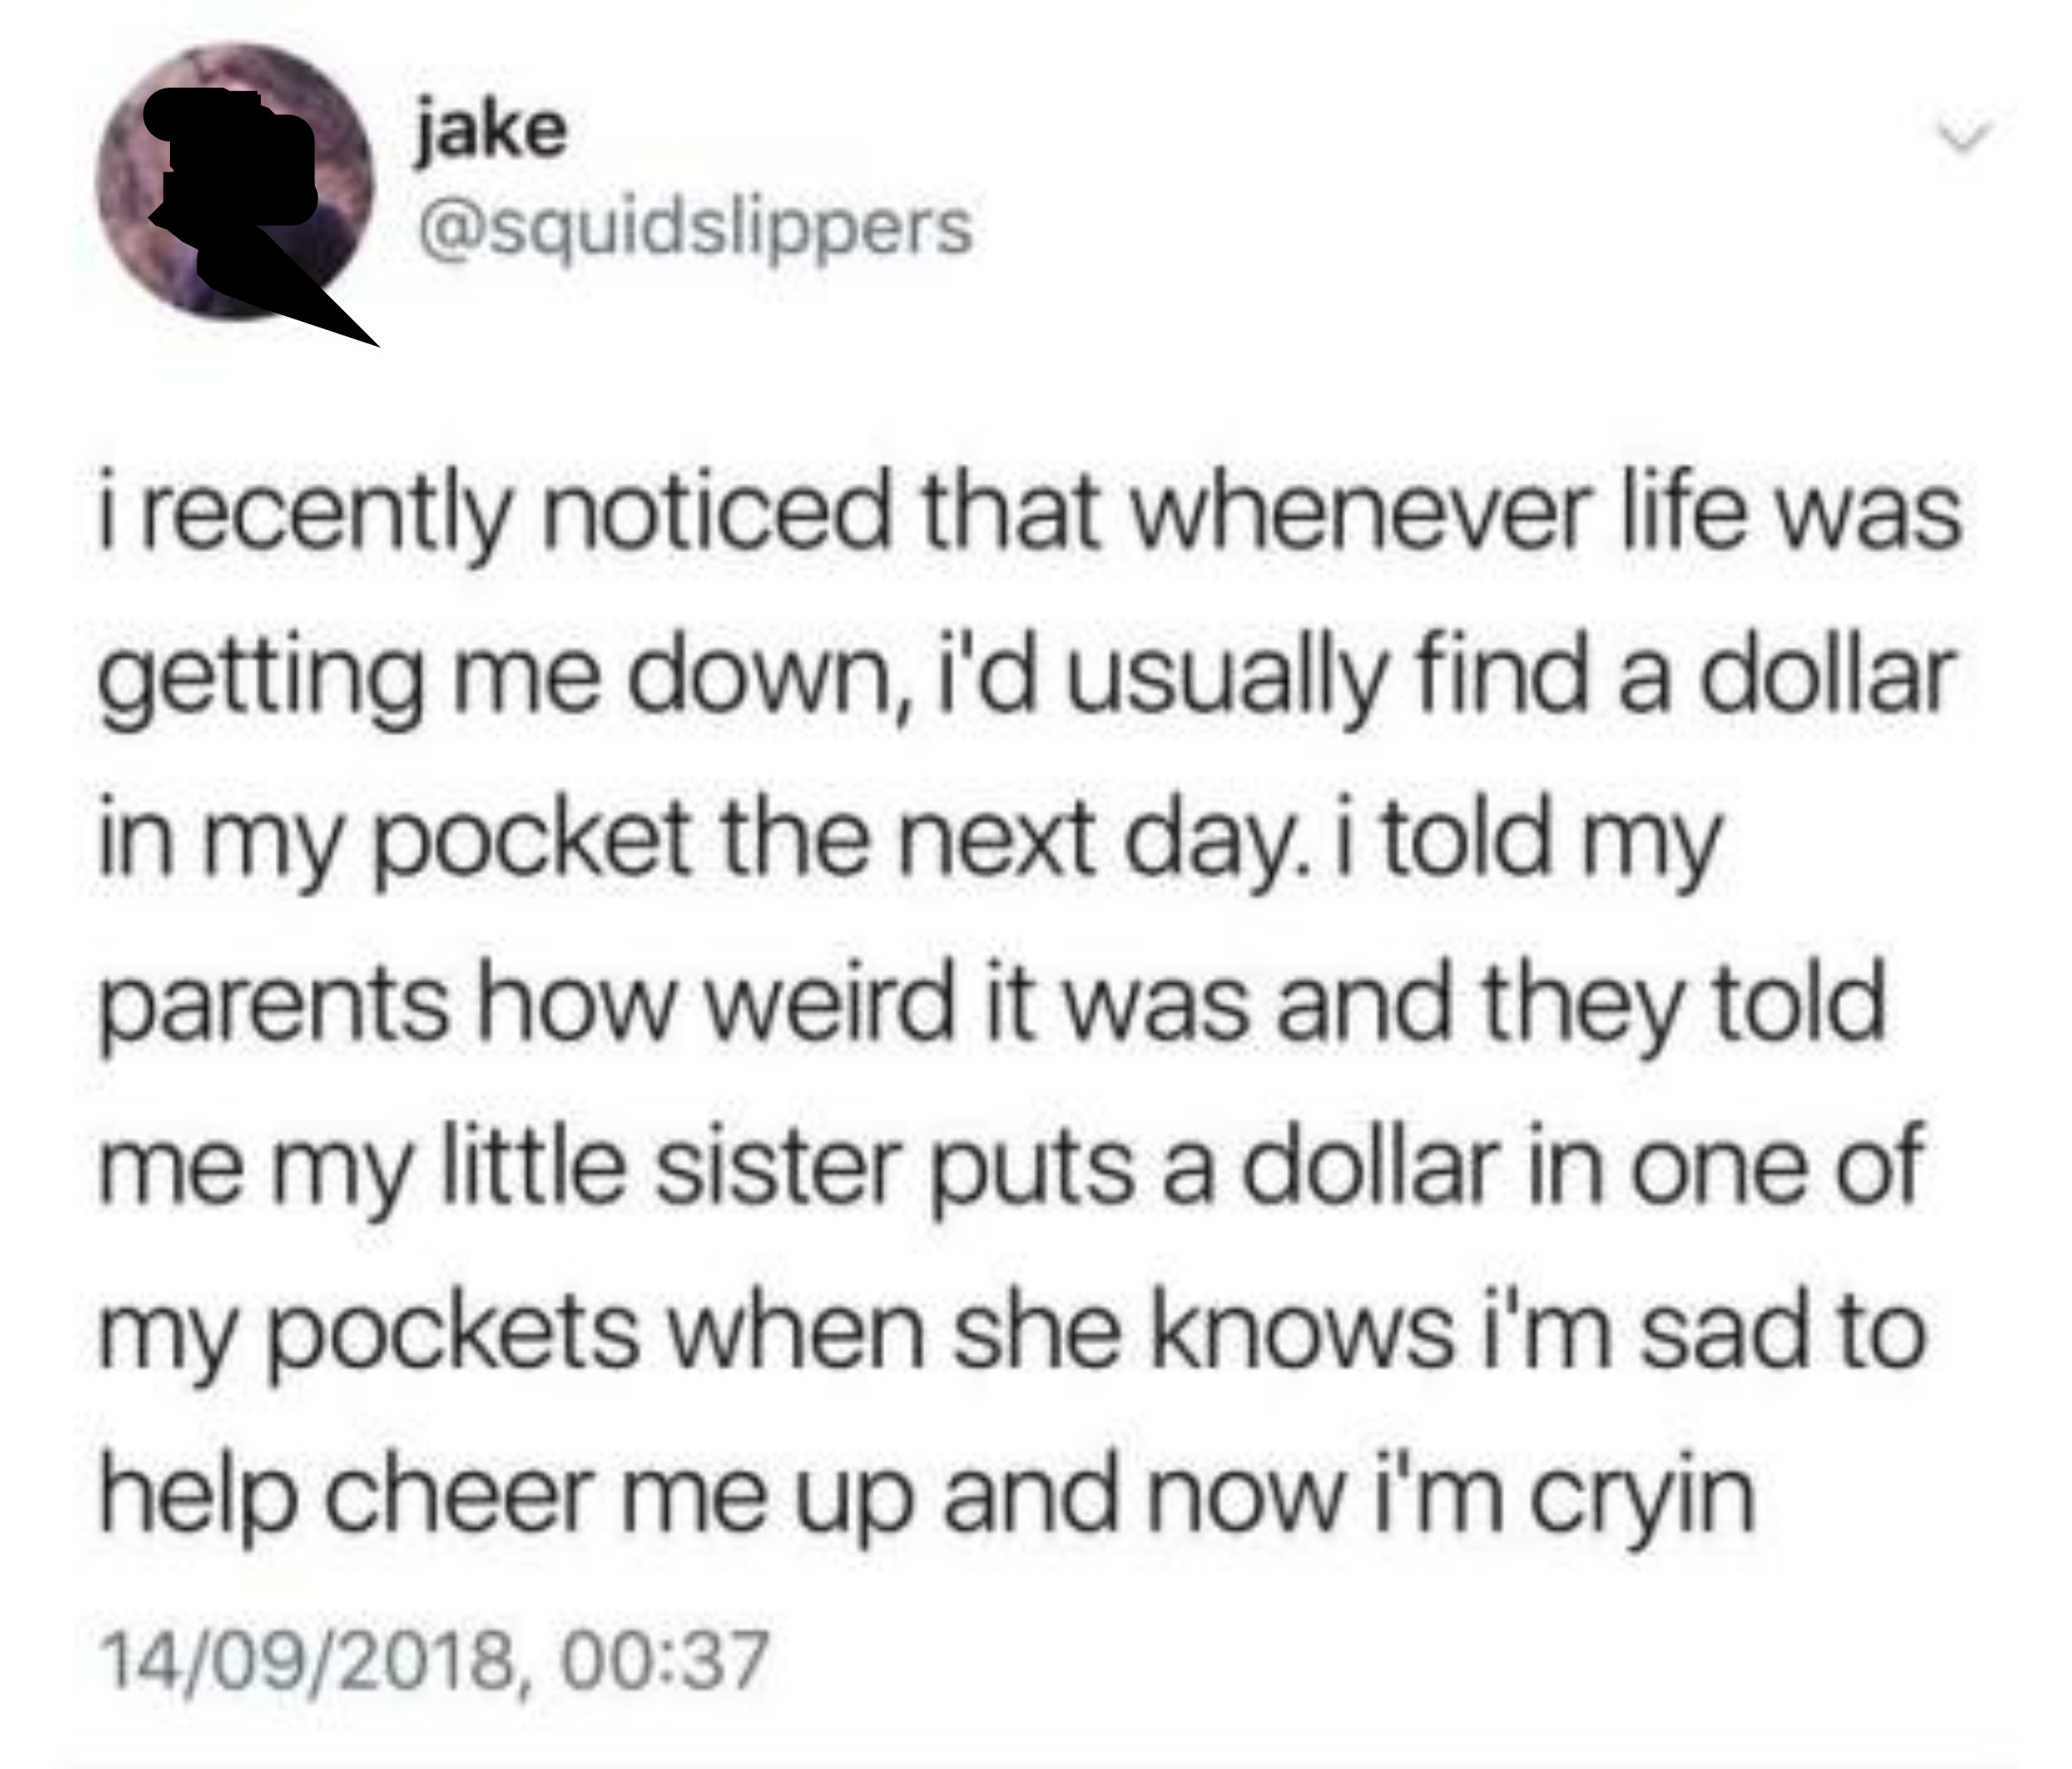 tweet about a little kid putting a dollar ini their siblings pocket every day